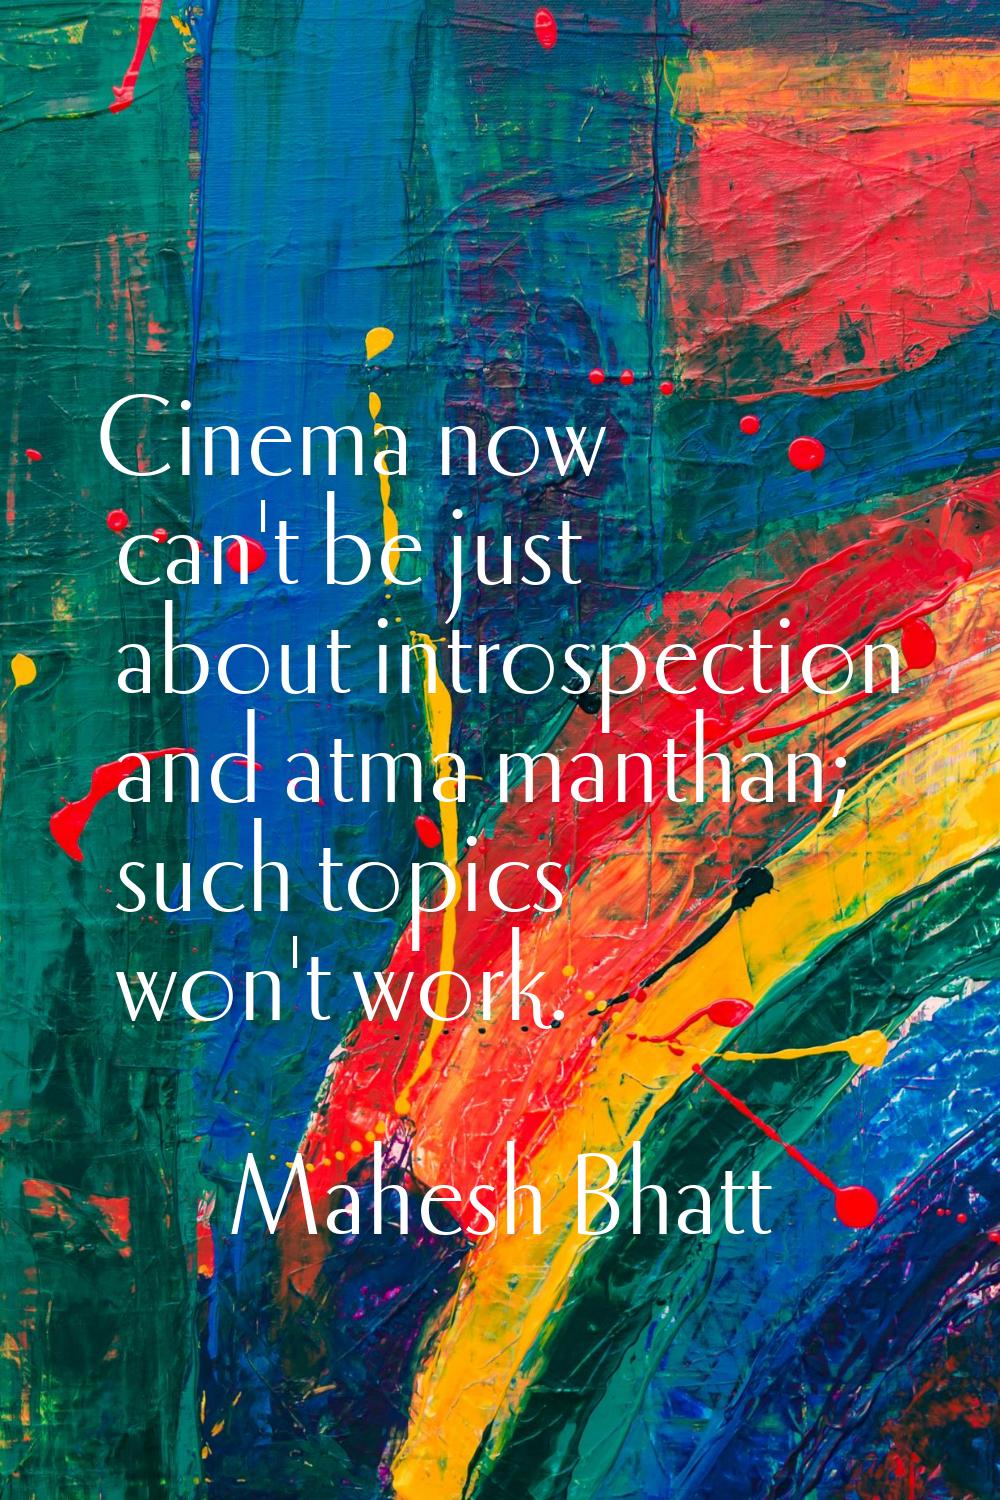 Cinema now can't be just about introspection and atma manthan; such topics won't work.